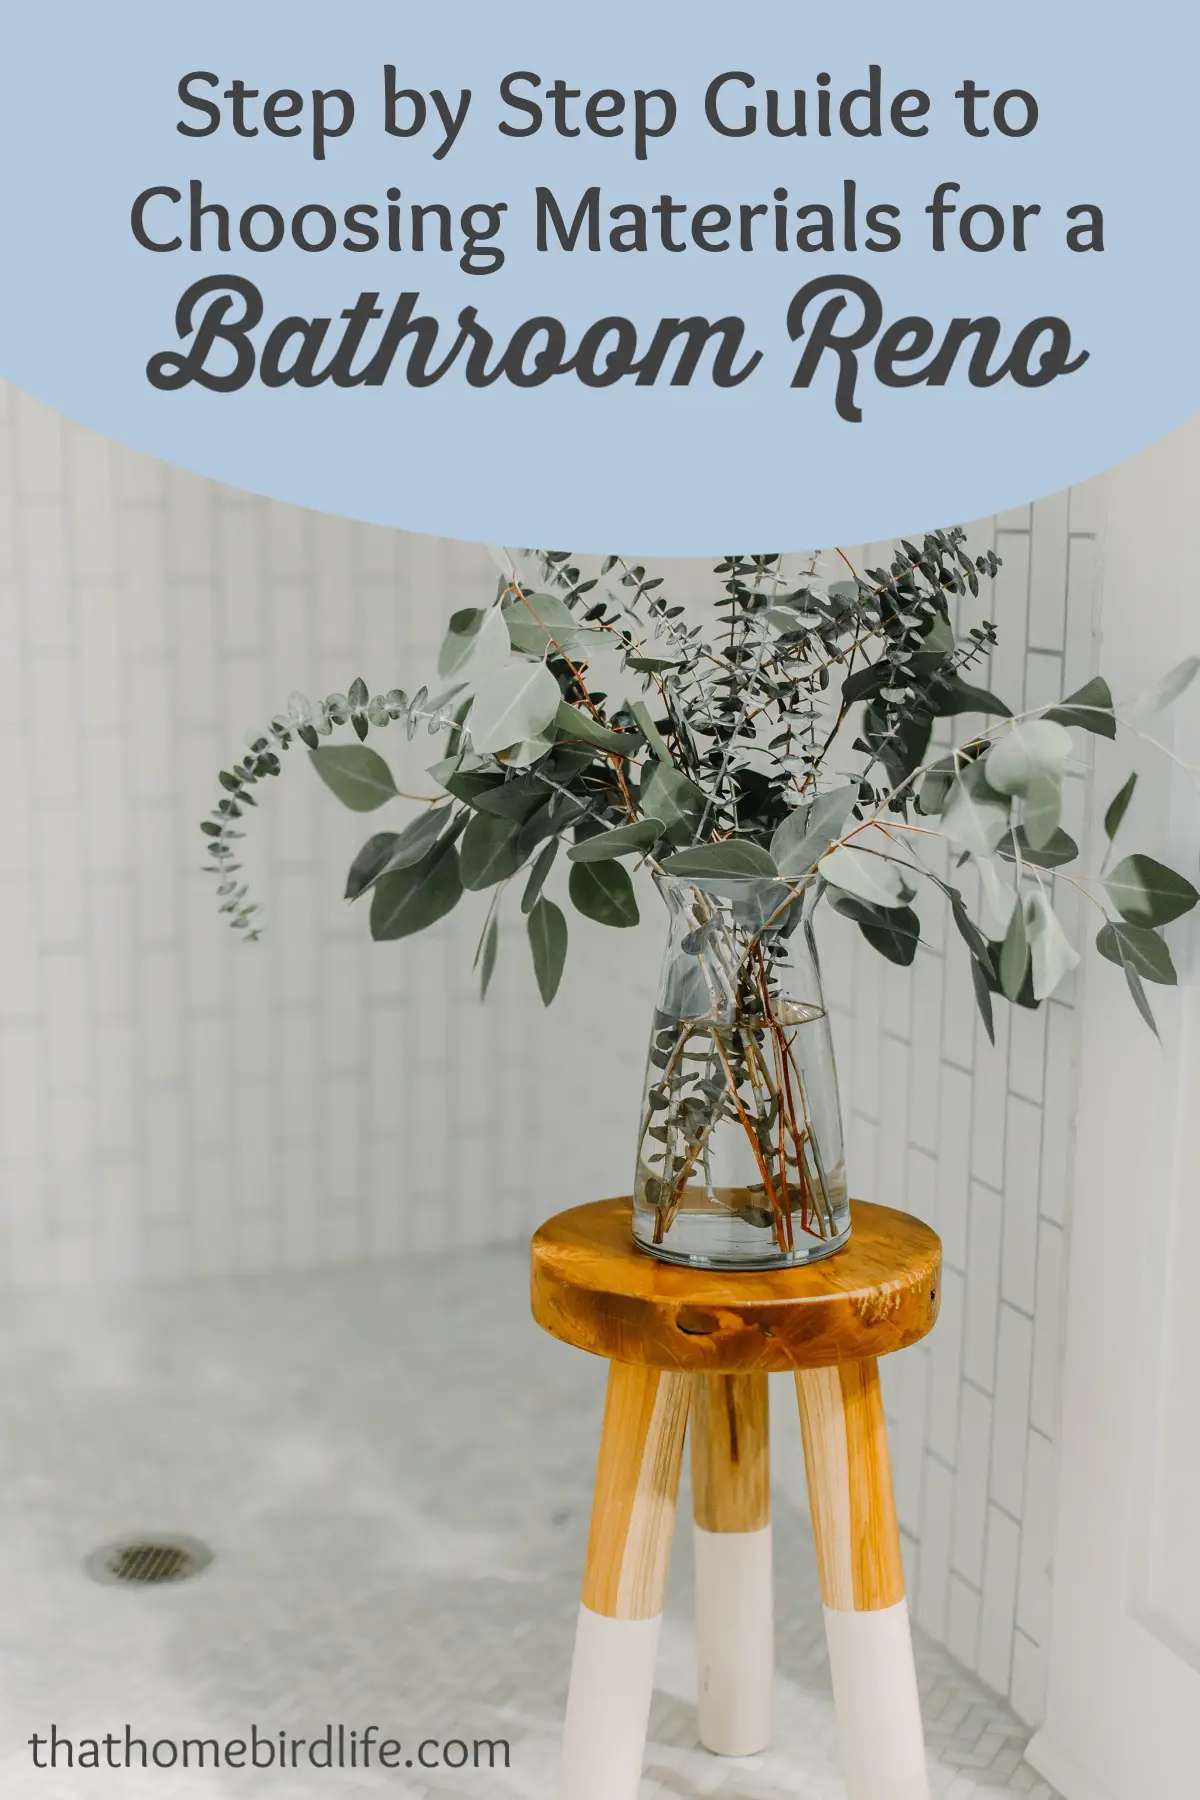 Step by Step Guide to Choosing Materials for a Bathroom Renovation - That Homebird Life Blog #bathroomdesign #homerenovation